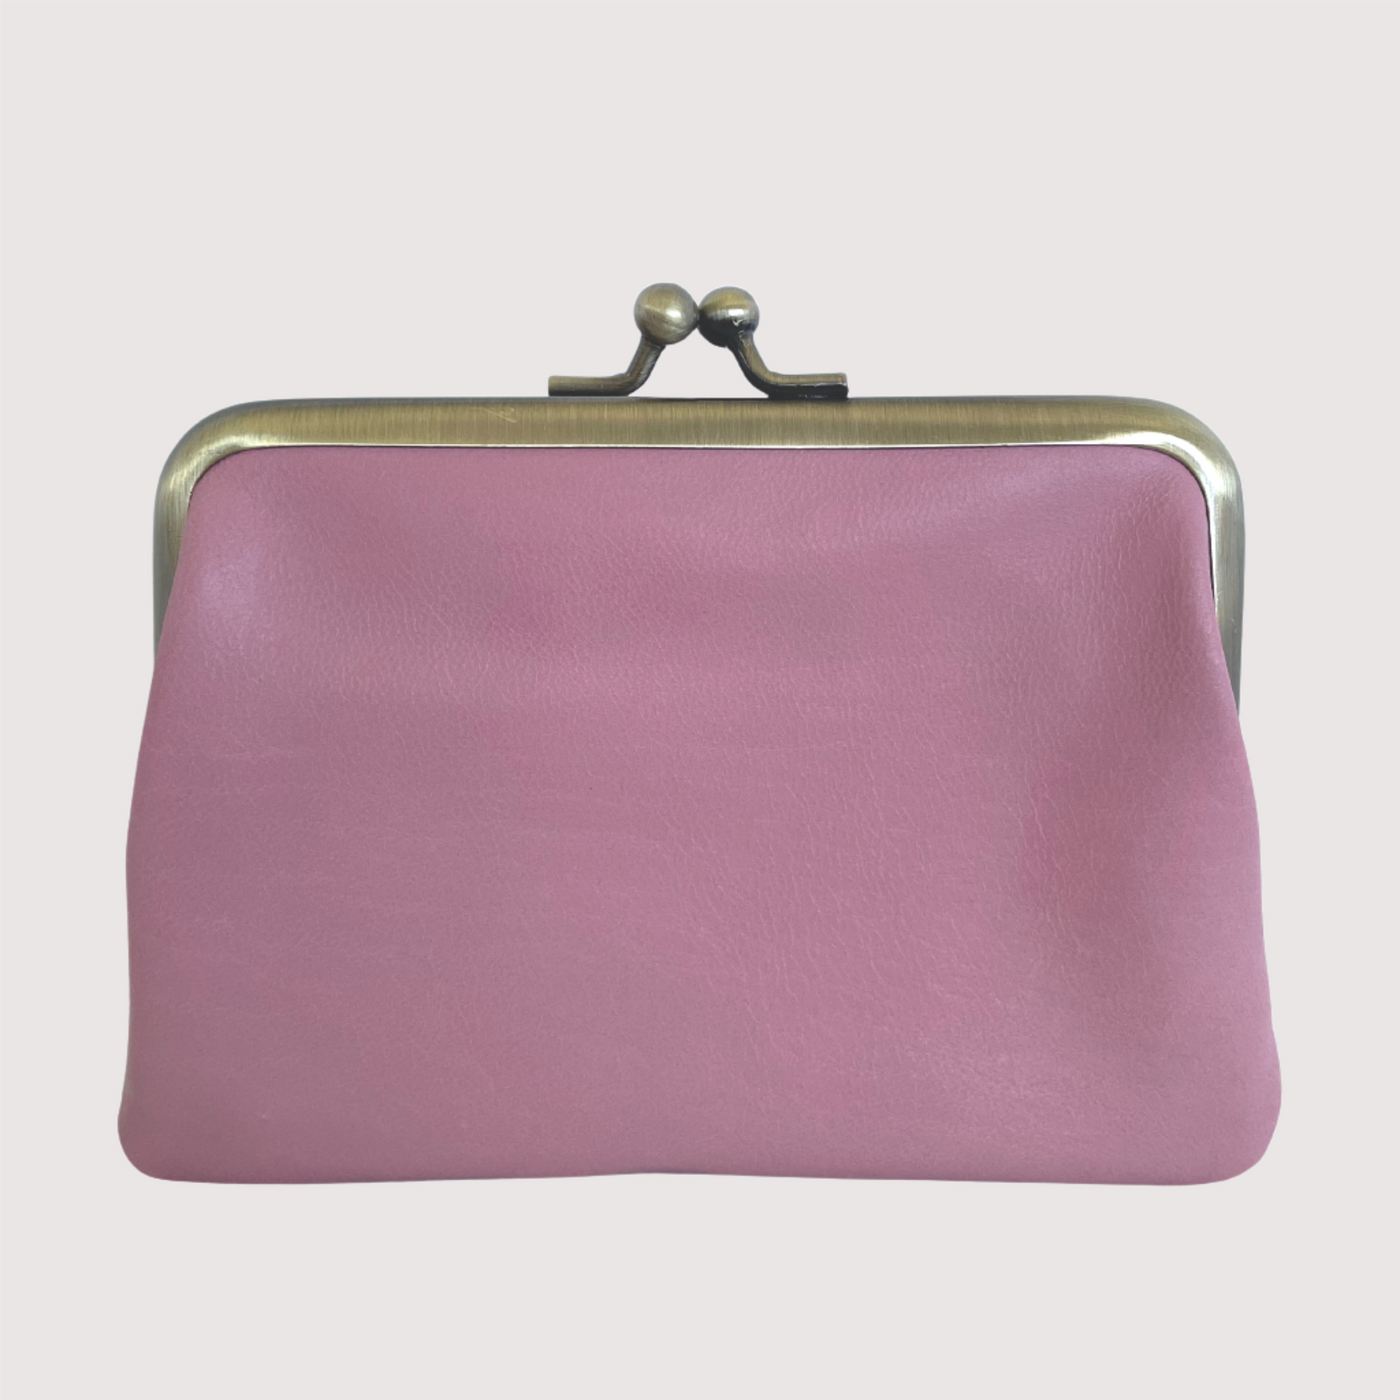 Pastel Pink Leather Penny's Purse